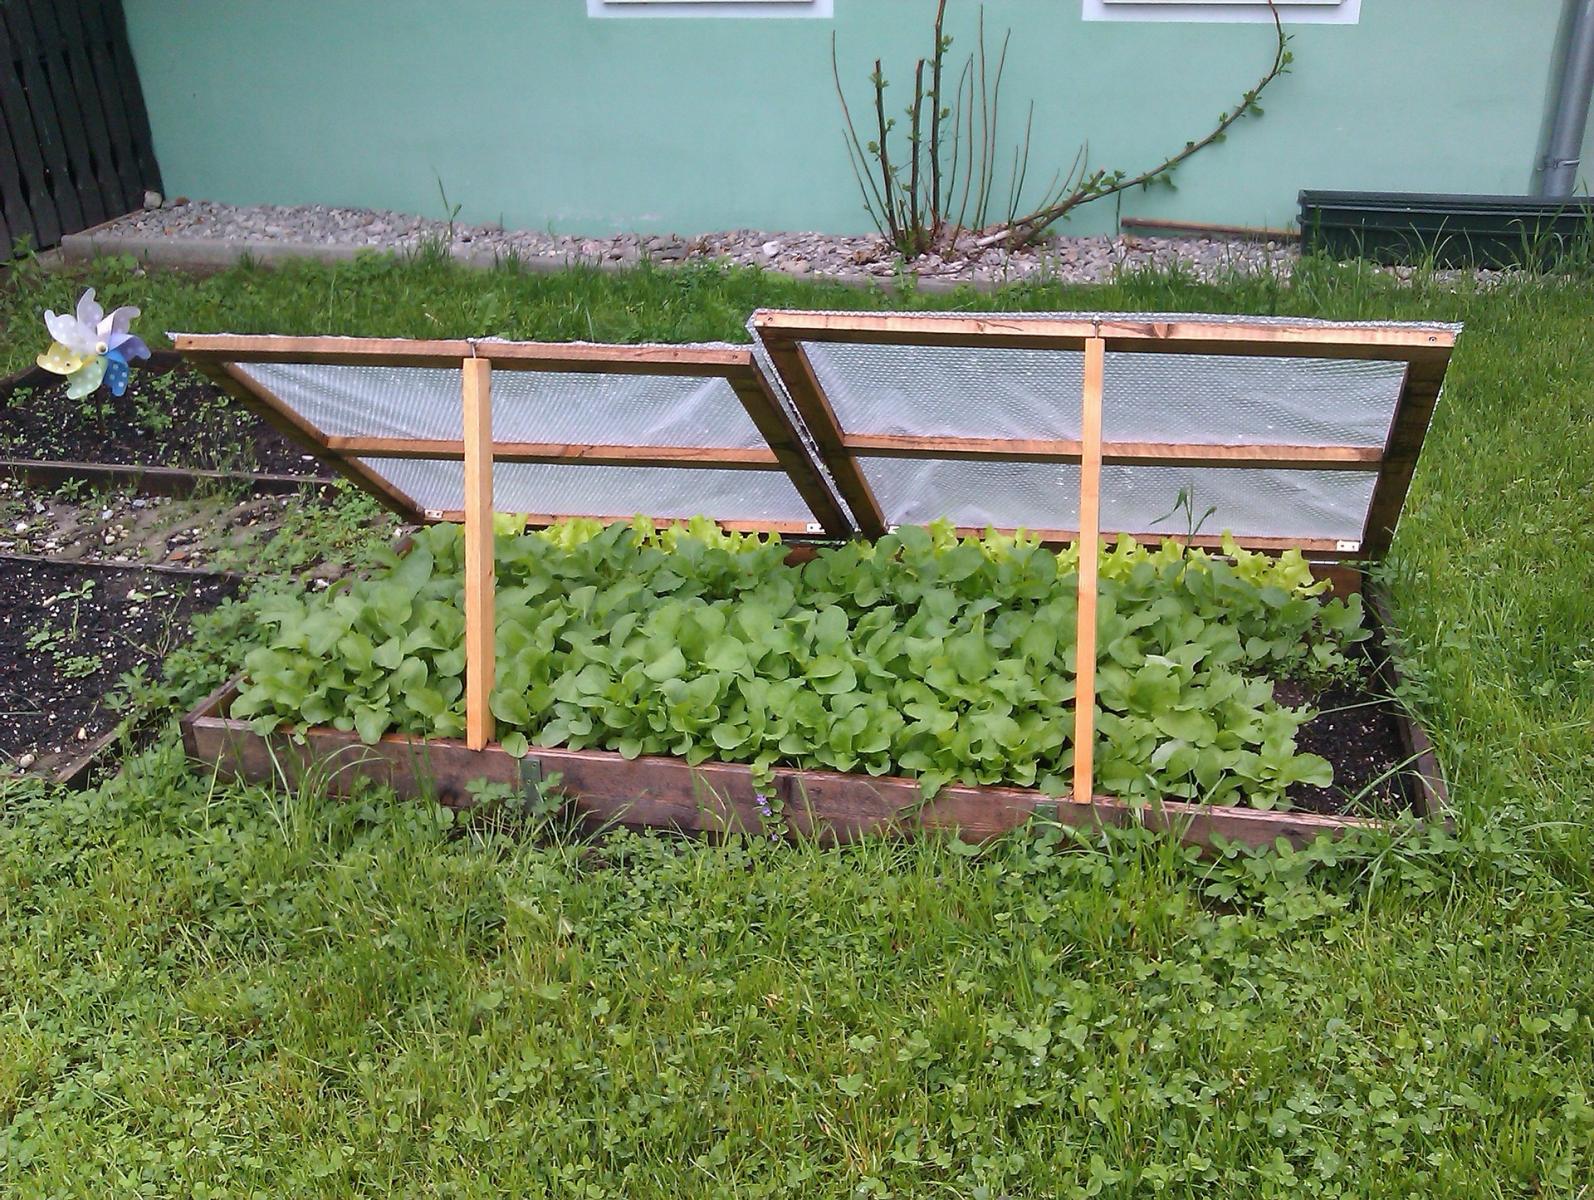 Image of a cold frame